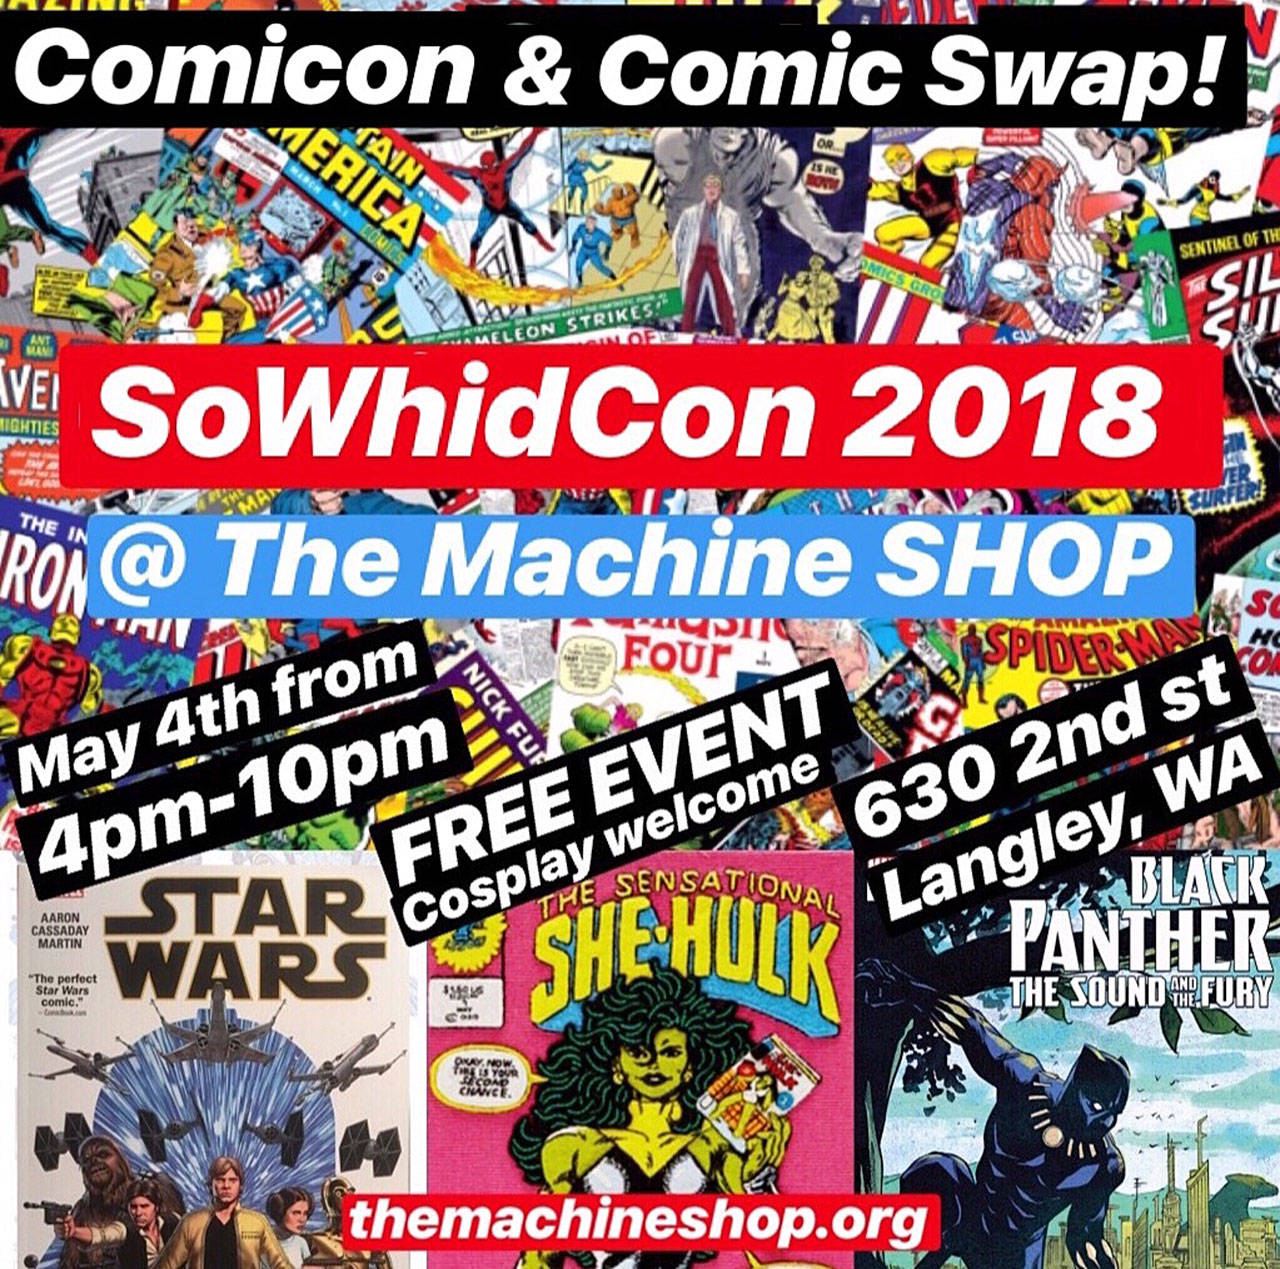 South Whidbey gets its first ComicCon Friday, May 4 at Langley’s Machine Shop. People are encouraged to dress in their favorite characters and bring comic books to share and swap.